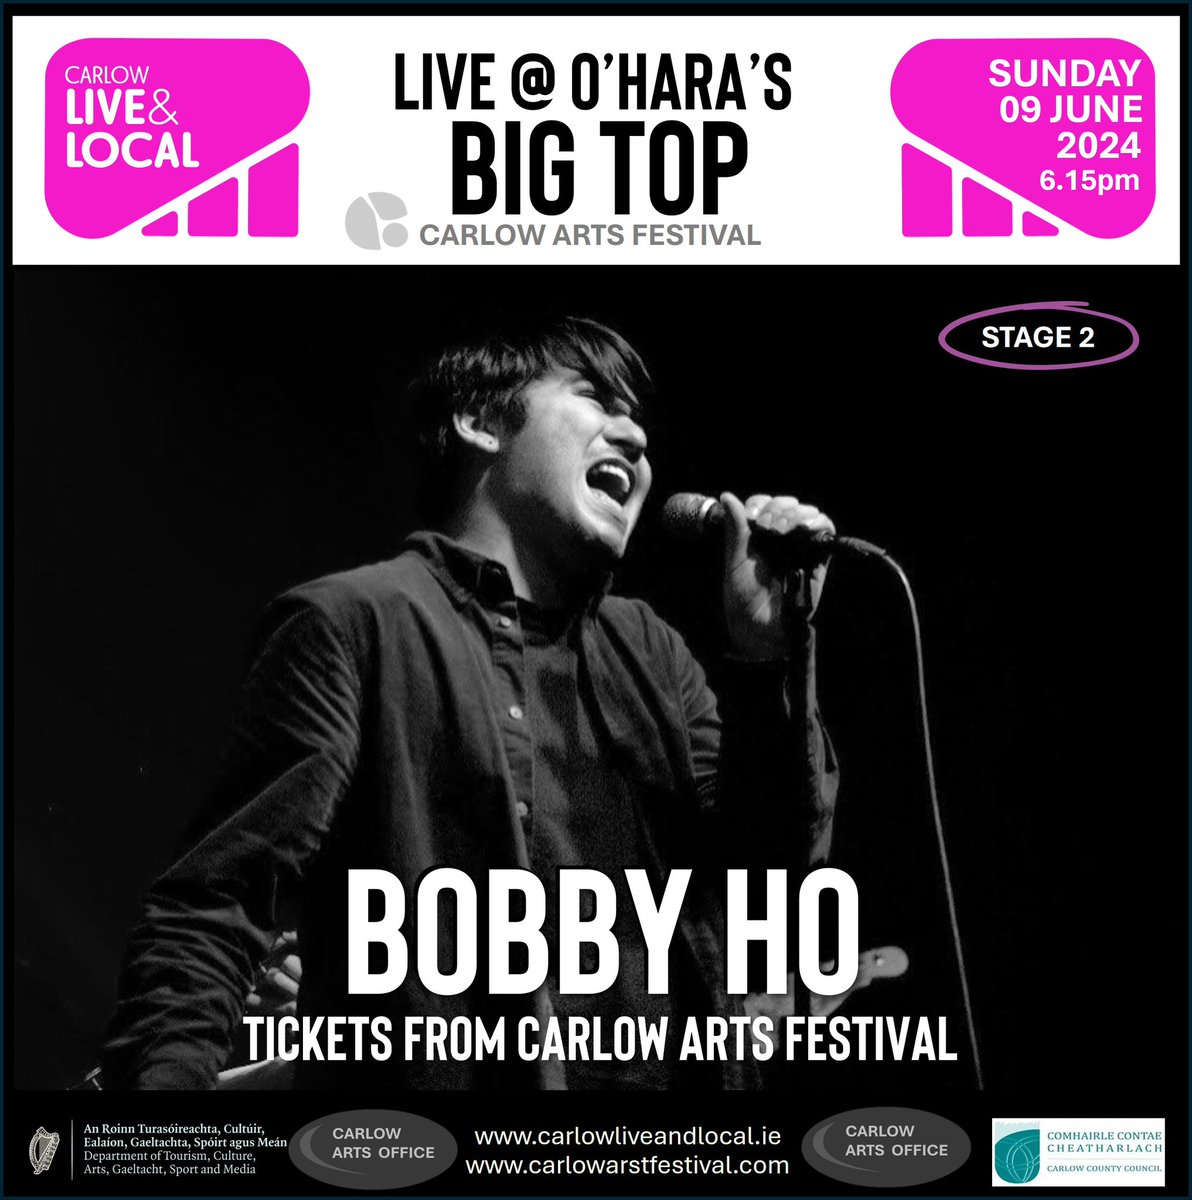 Tickets on sale now. Thanks to Carlow Arts Office @Carlow_Co_Co @carlowarts and @oharasbeers #Carlowartsfestival